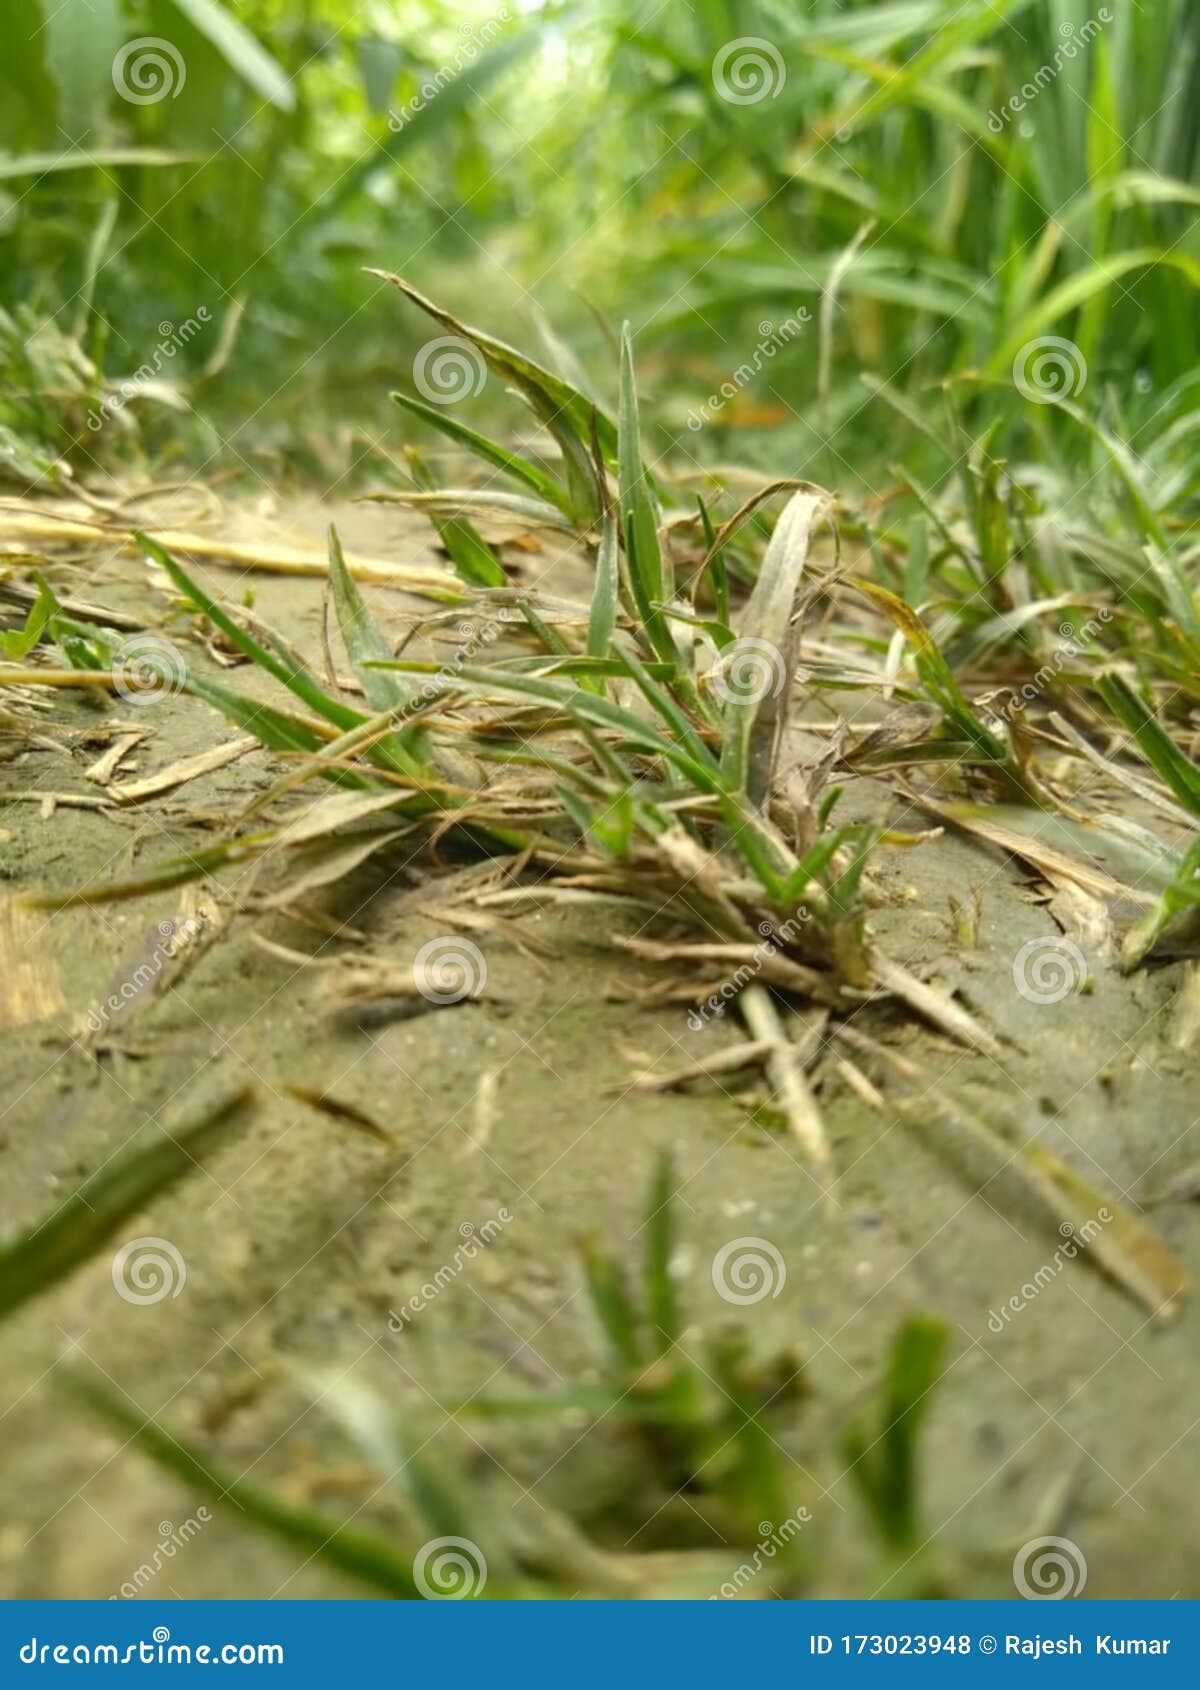 water grass, stock photo and wallpaper background